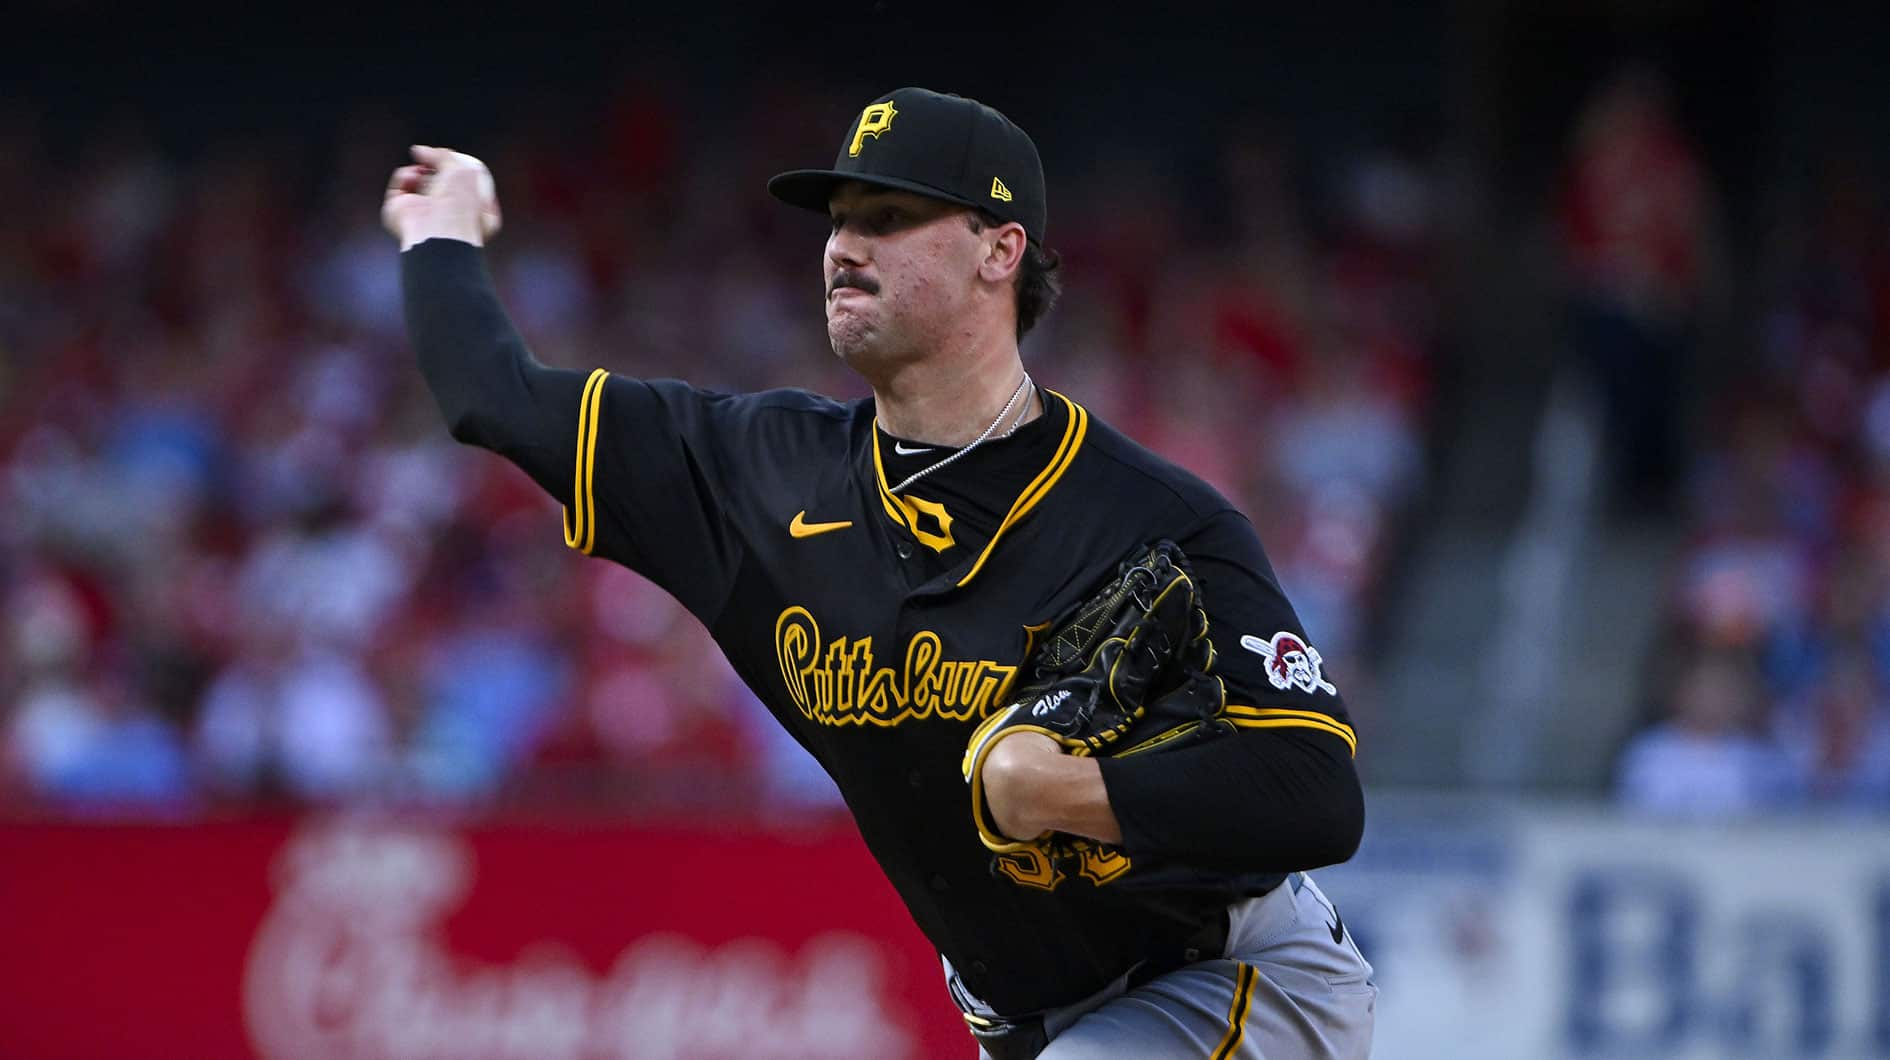  Pittsburgh Pirates starting pitcher Paul Skenes (30) pitches against the St. Louis Cardinals 